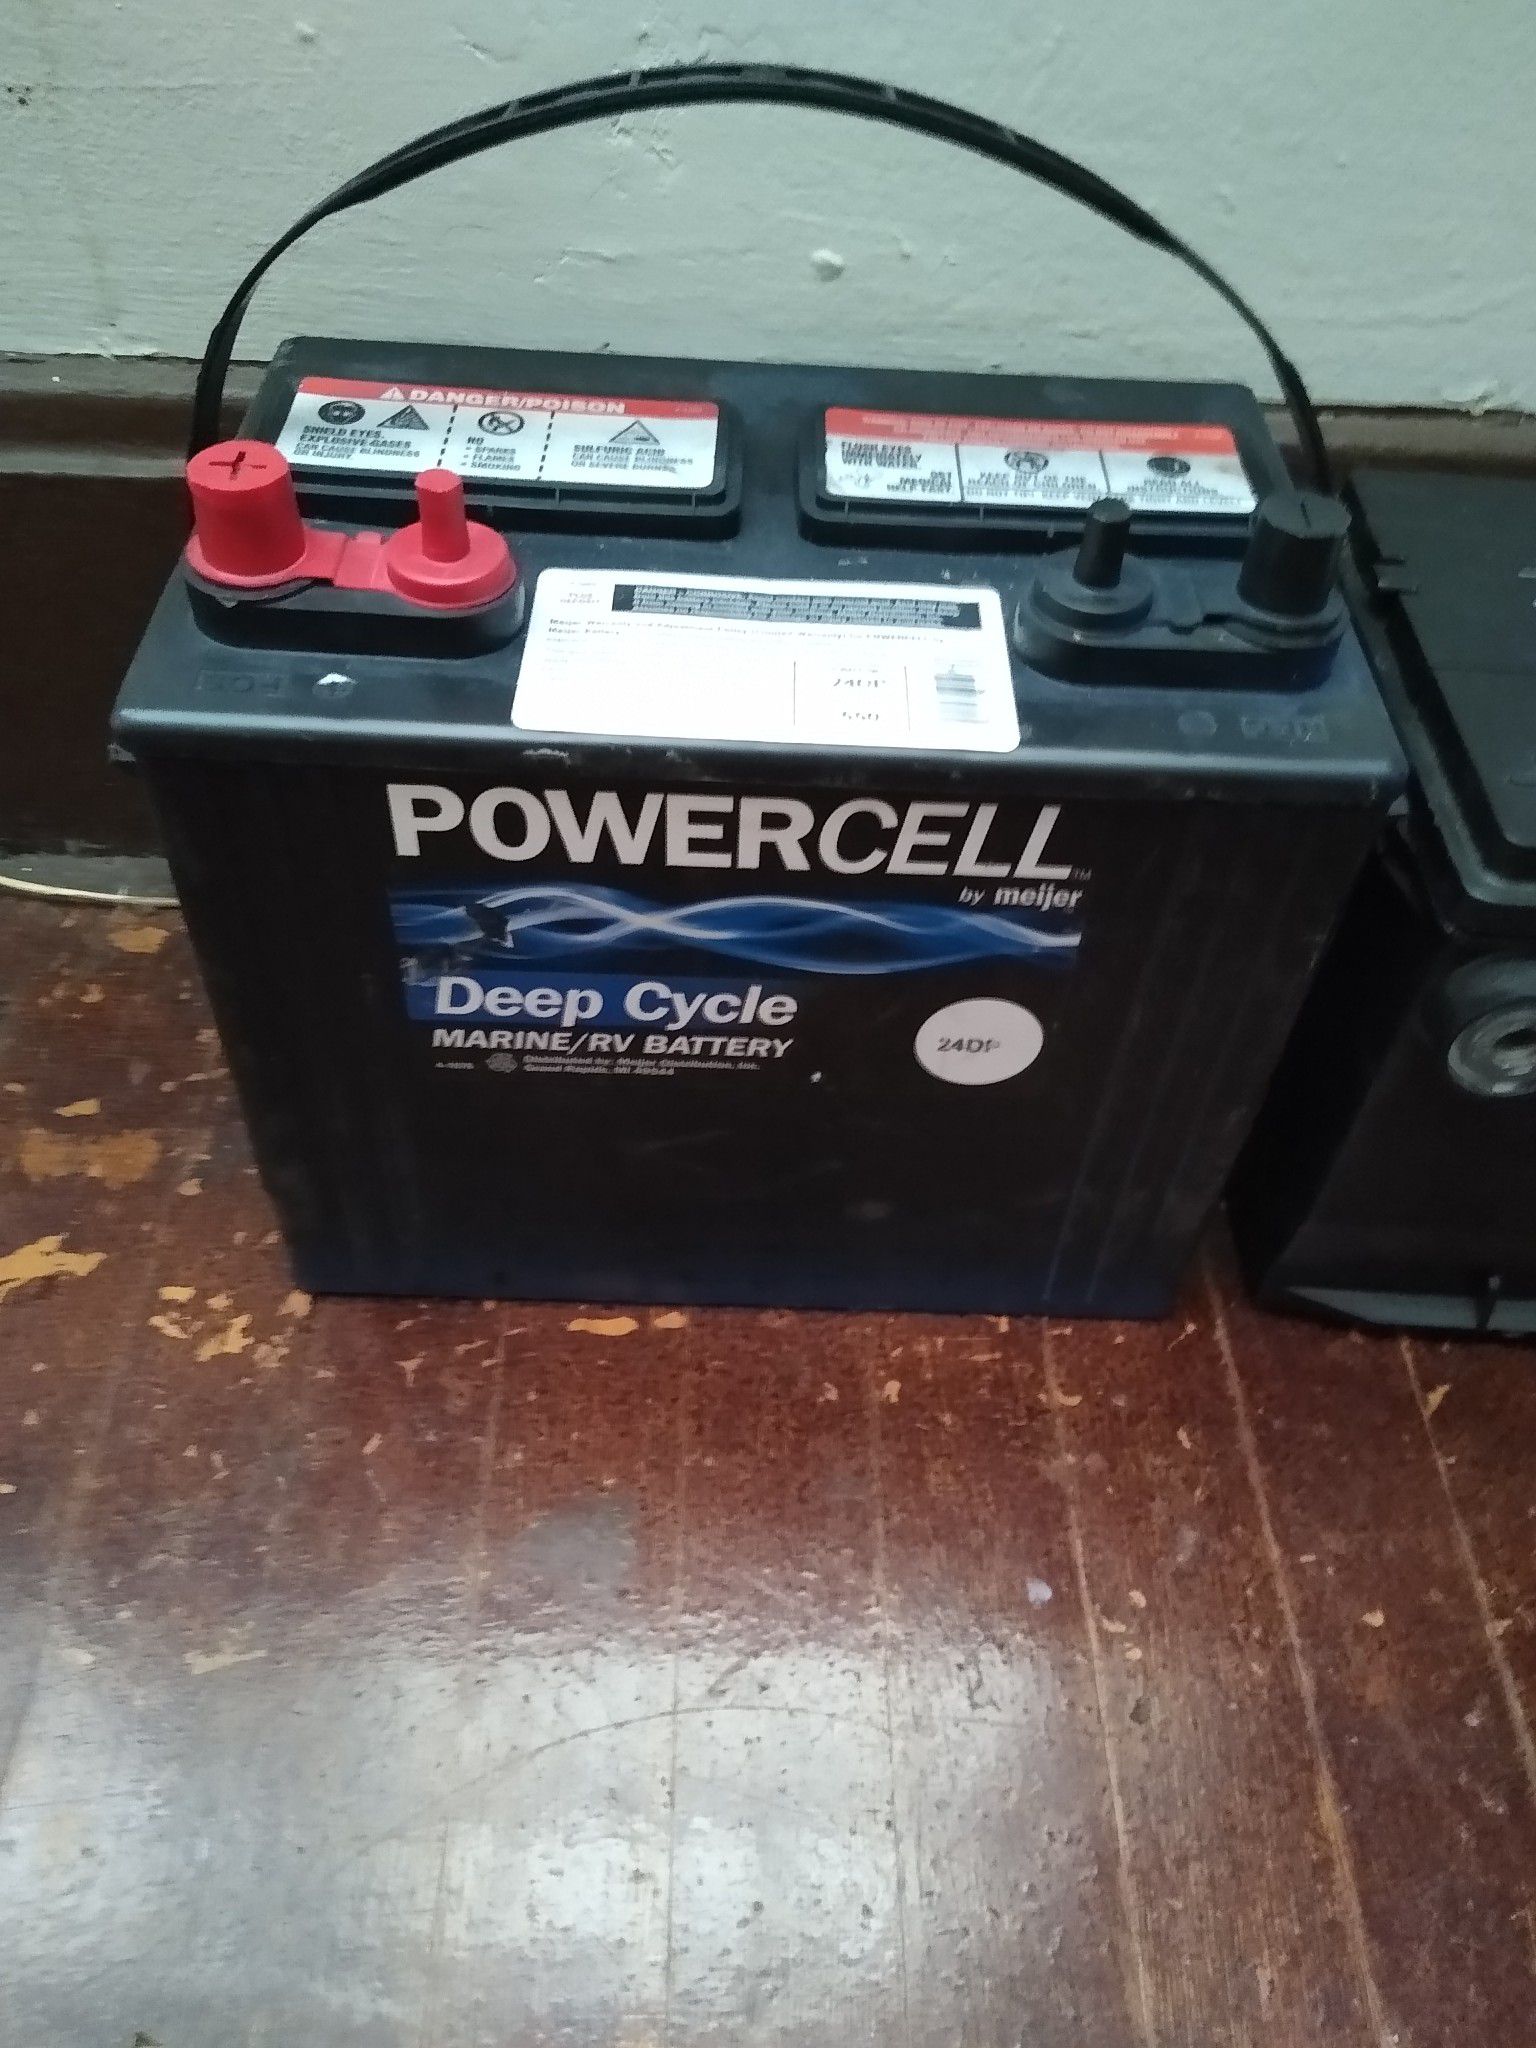 Powercell deep cycle marine/ RV battery